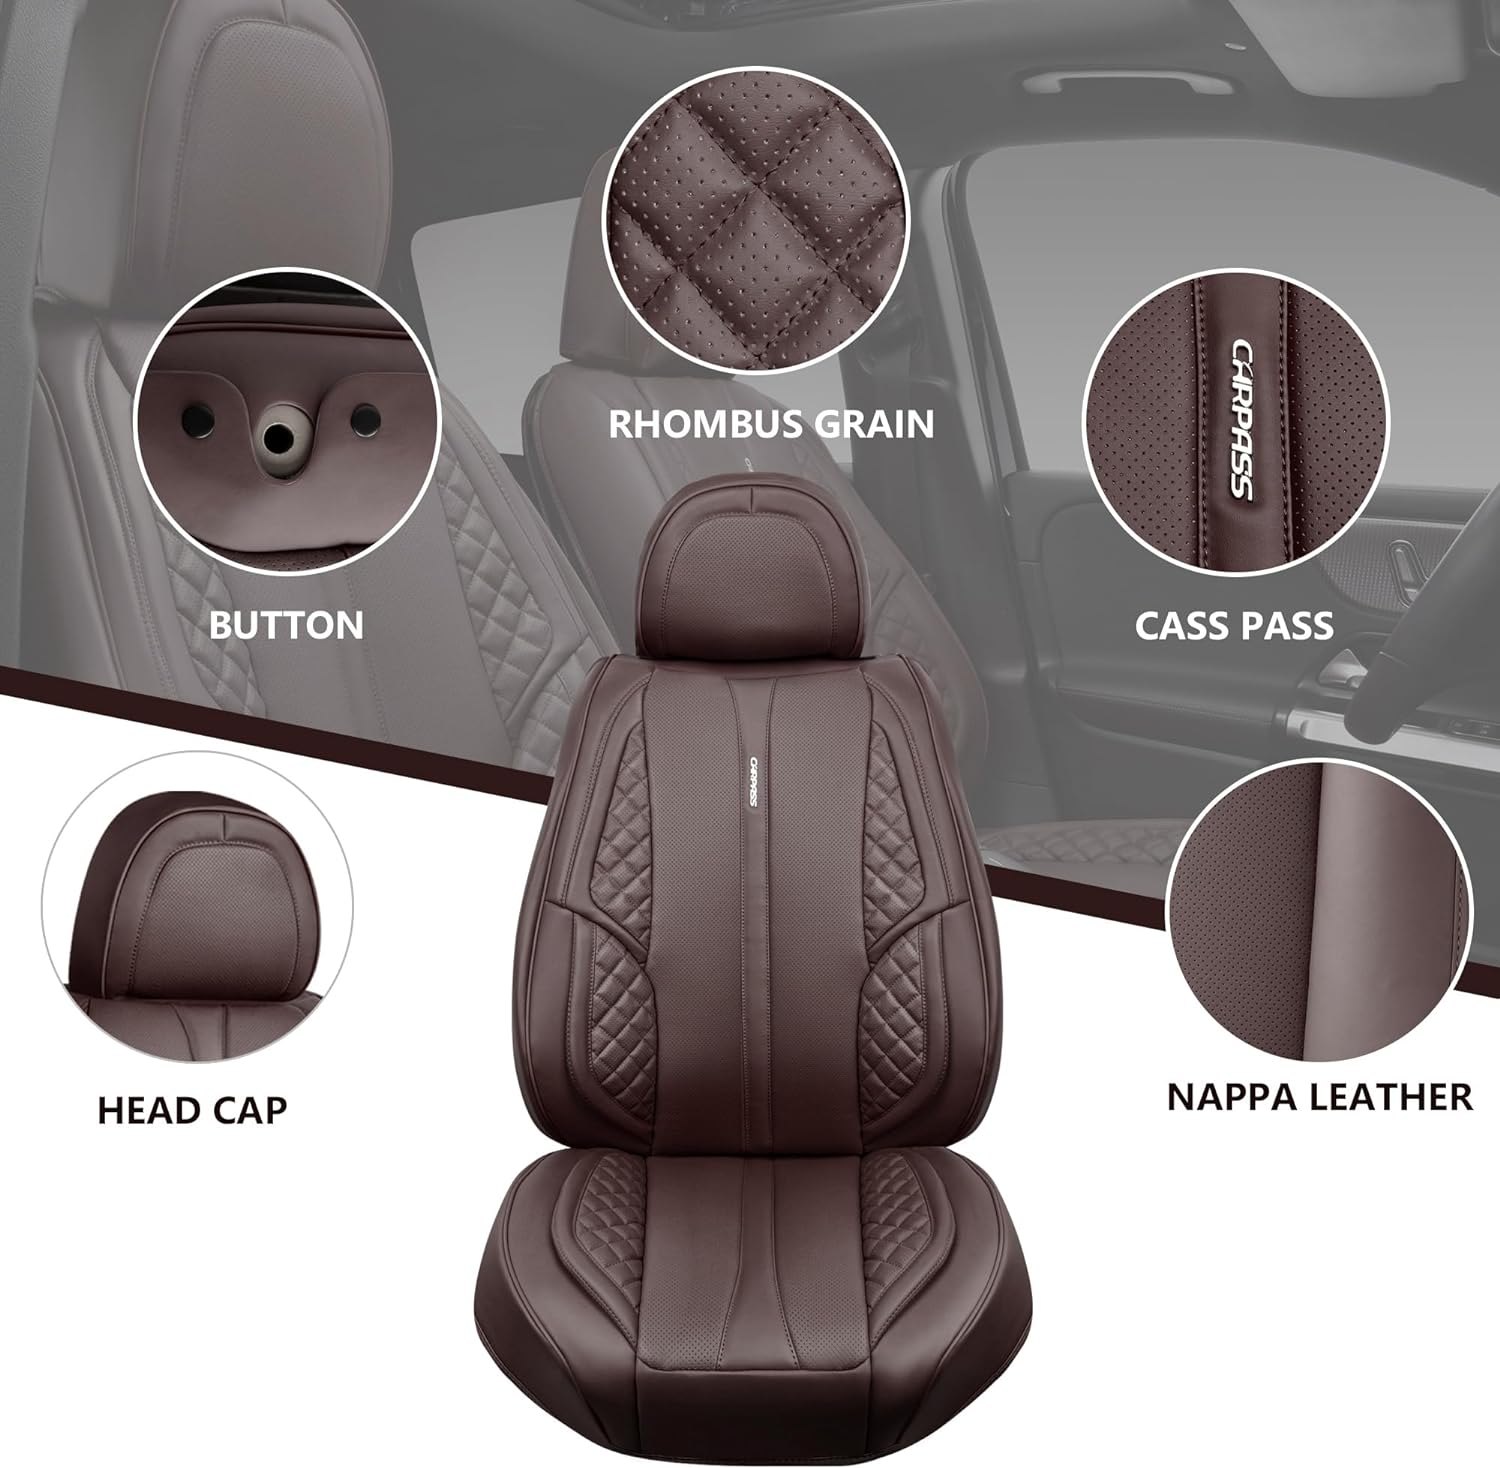 CAR PASS Nappa Leather Car Seat Covers Full Set Waterproof Protector Durable Cushioned,Universal Fit for Sedan SUV Pick-up Truck,Automotive, Anti-Slip and Backseat Luxury Premium Deluxe(Black)